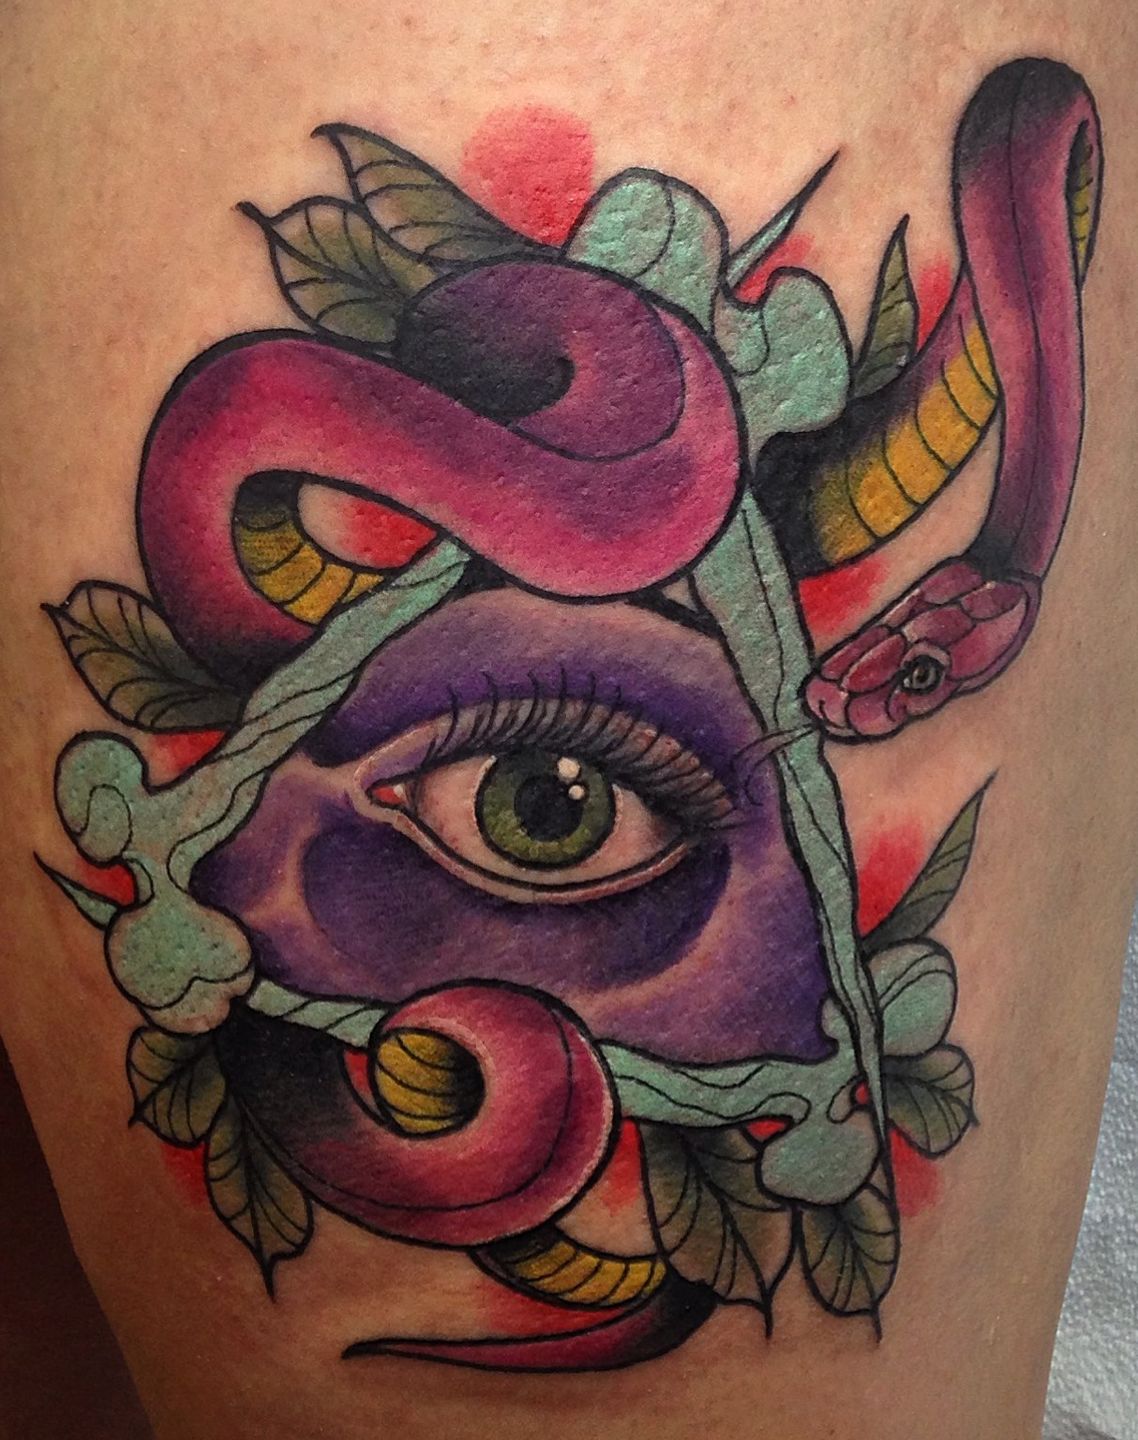 Third eye done by Girarno, private studio in Aix-les-Bains, France : r/ tattoos